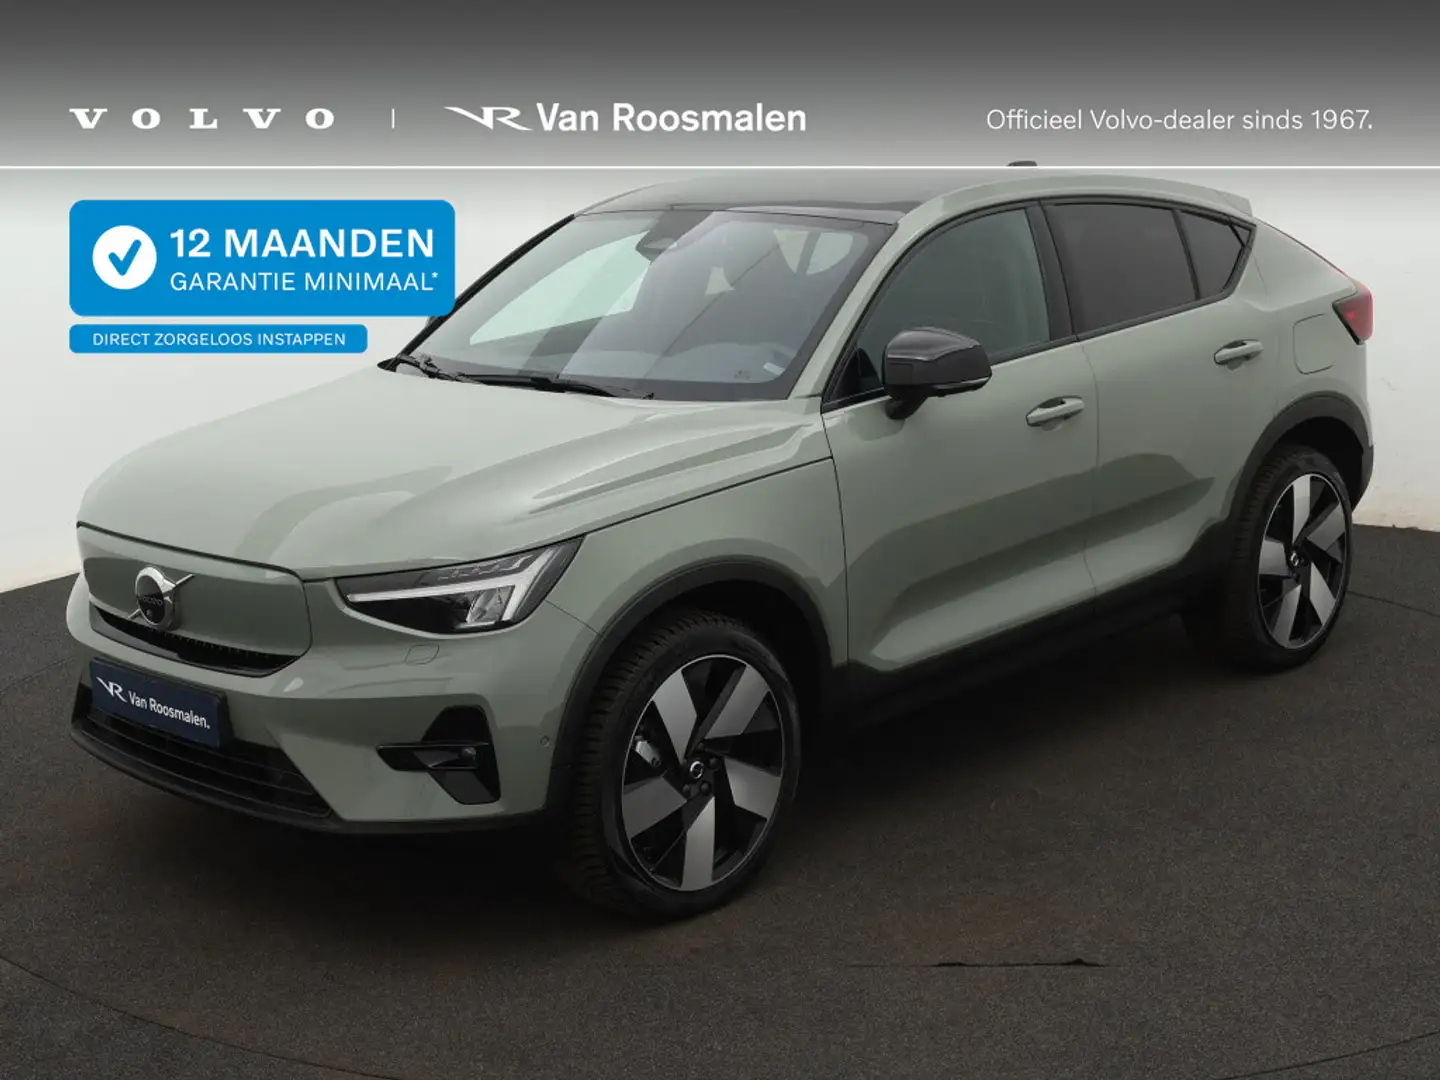 Volvo C40 Extended Plus 82 kWh | 20 inch wielen | privacy gl Vert - 1